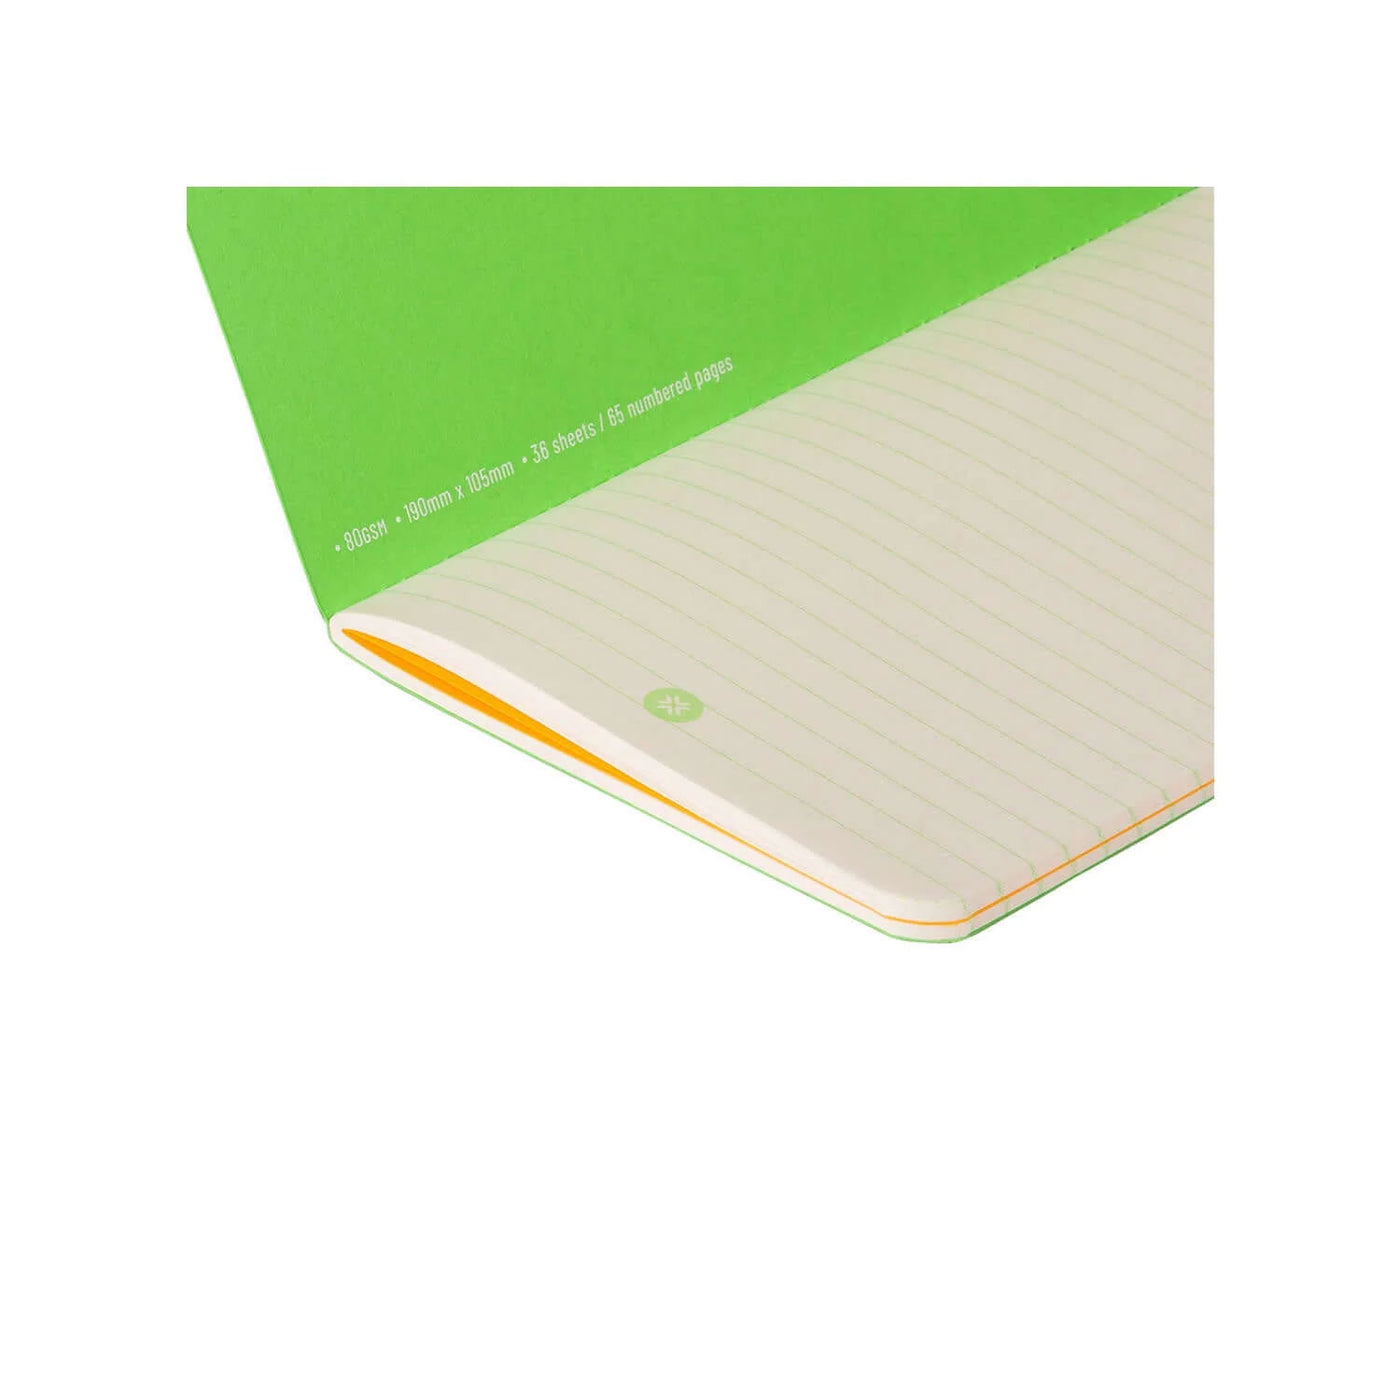 Pennline Quikfill Notebook Refill For Quikrite, Yellow Green - Set Of 2 7